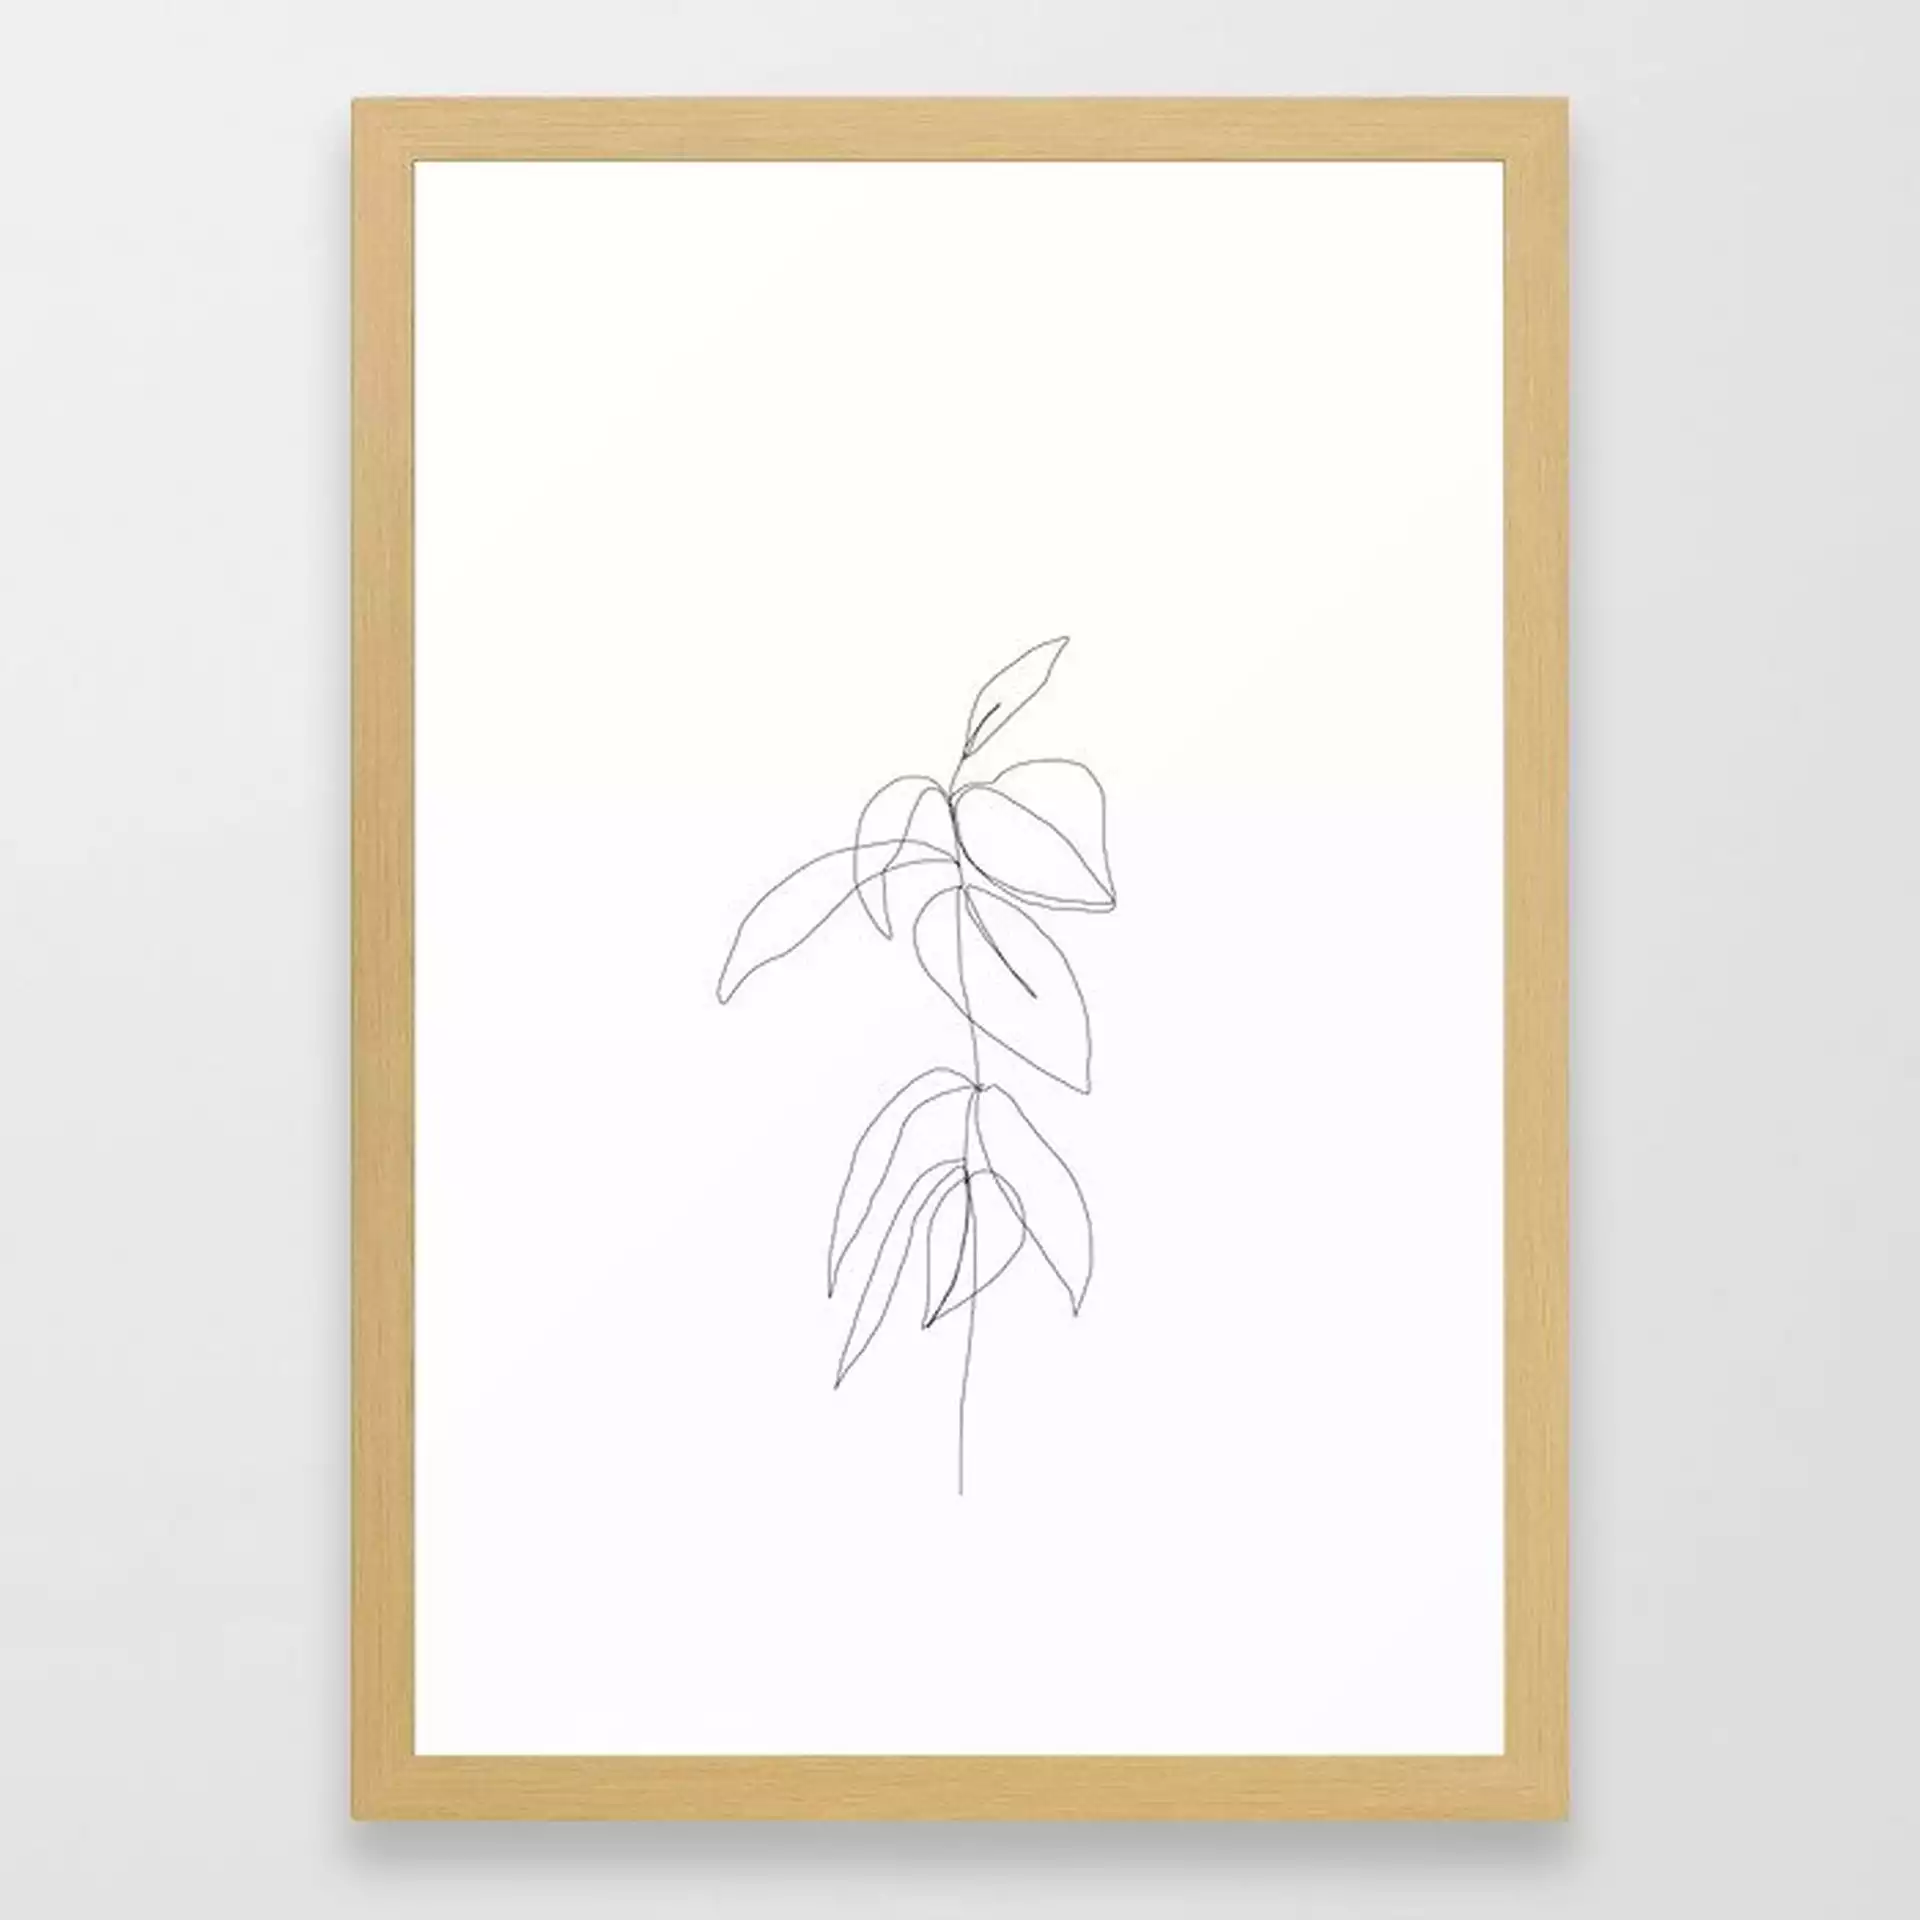 Still Life Plant Drawing - Caca Framed Art Print by The Colour Study - Conservation Natural - SMALL-15x21